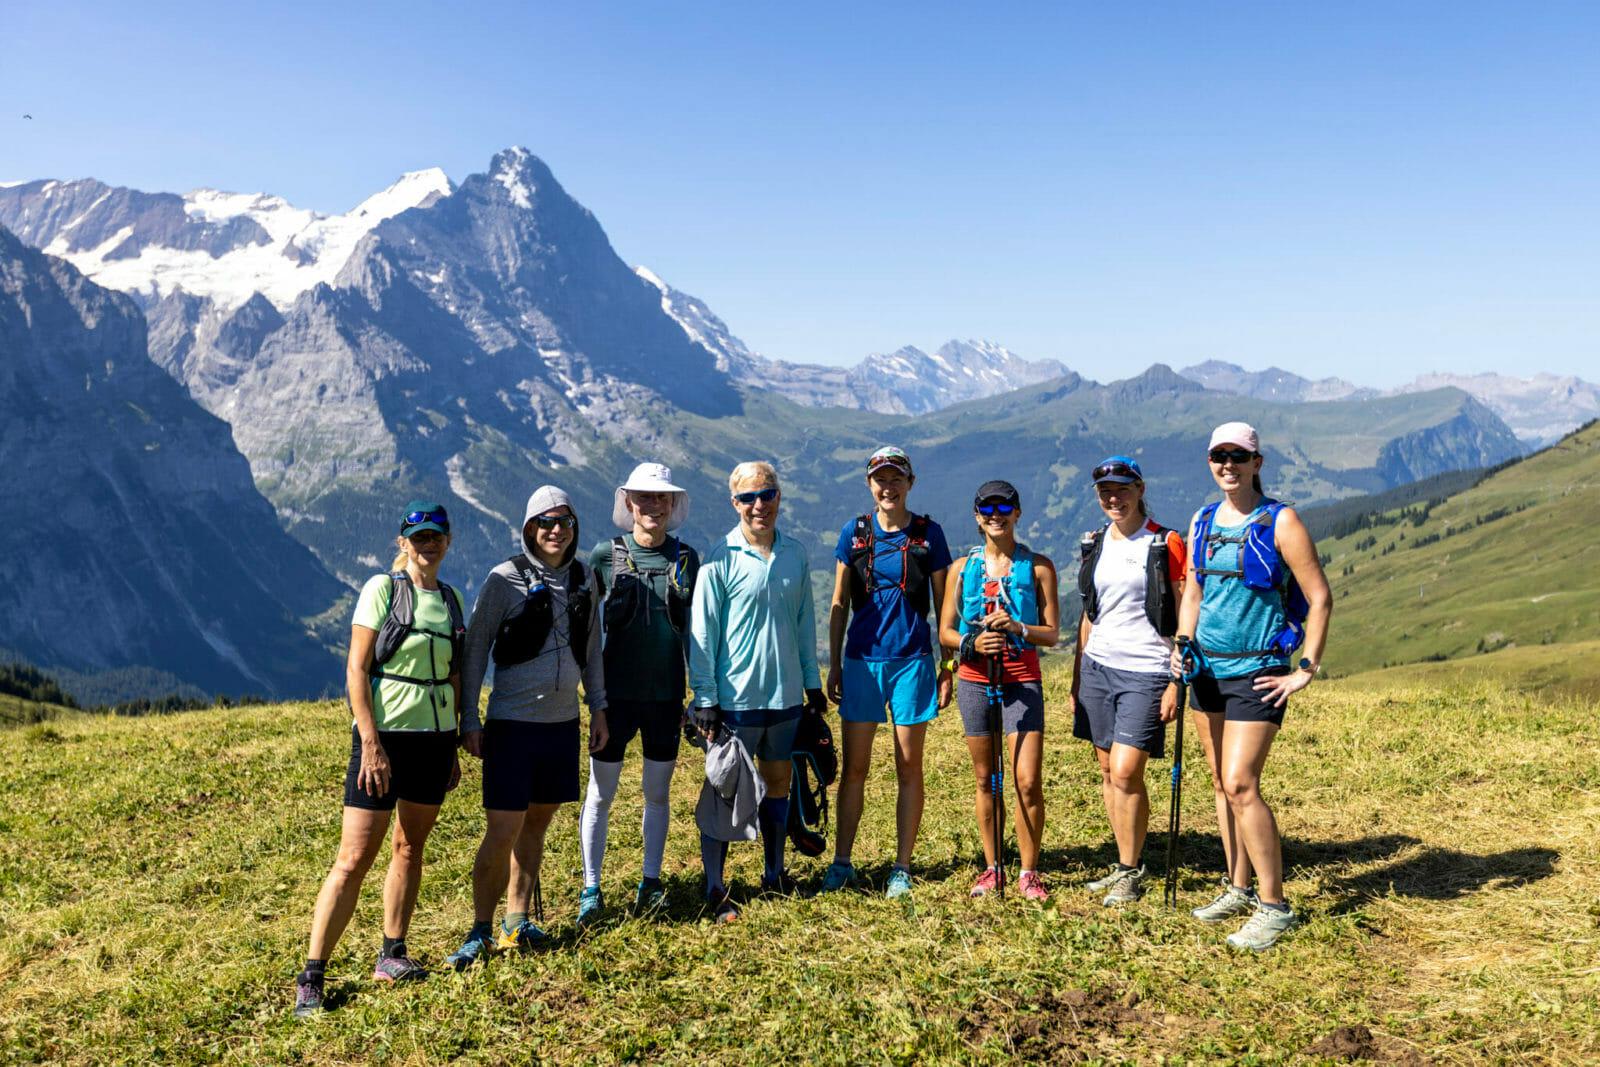 Eiger group photo